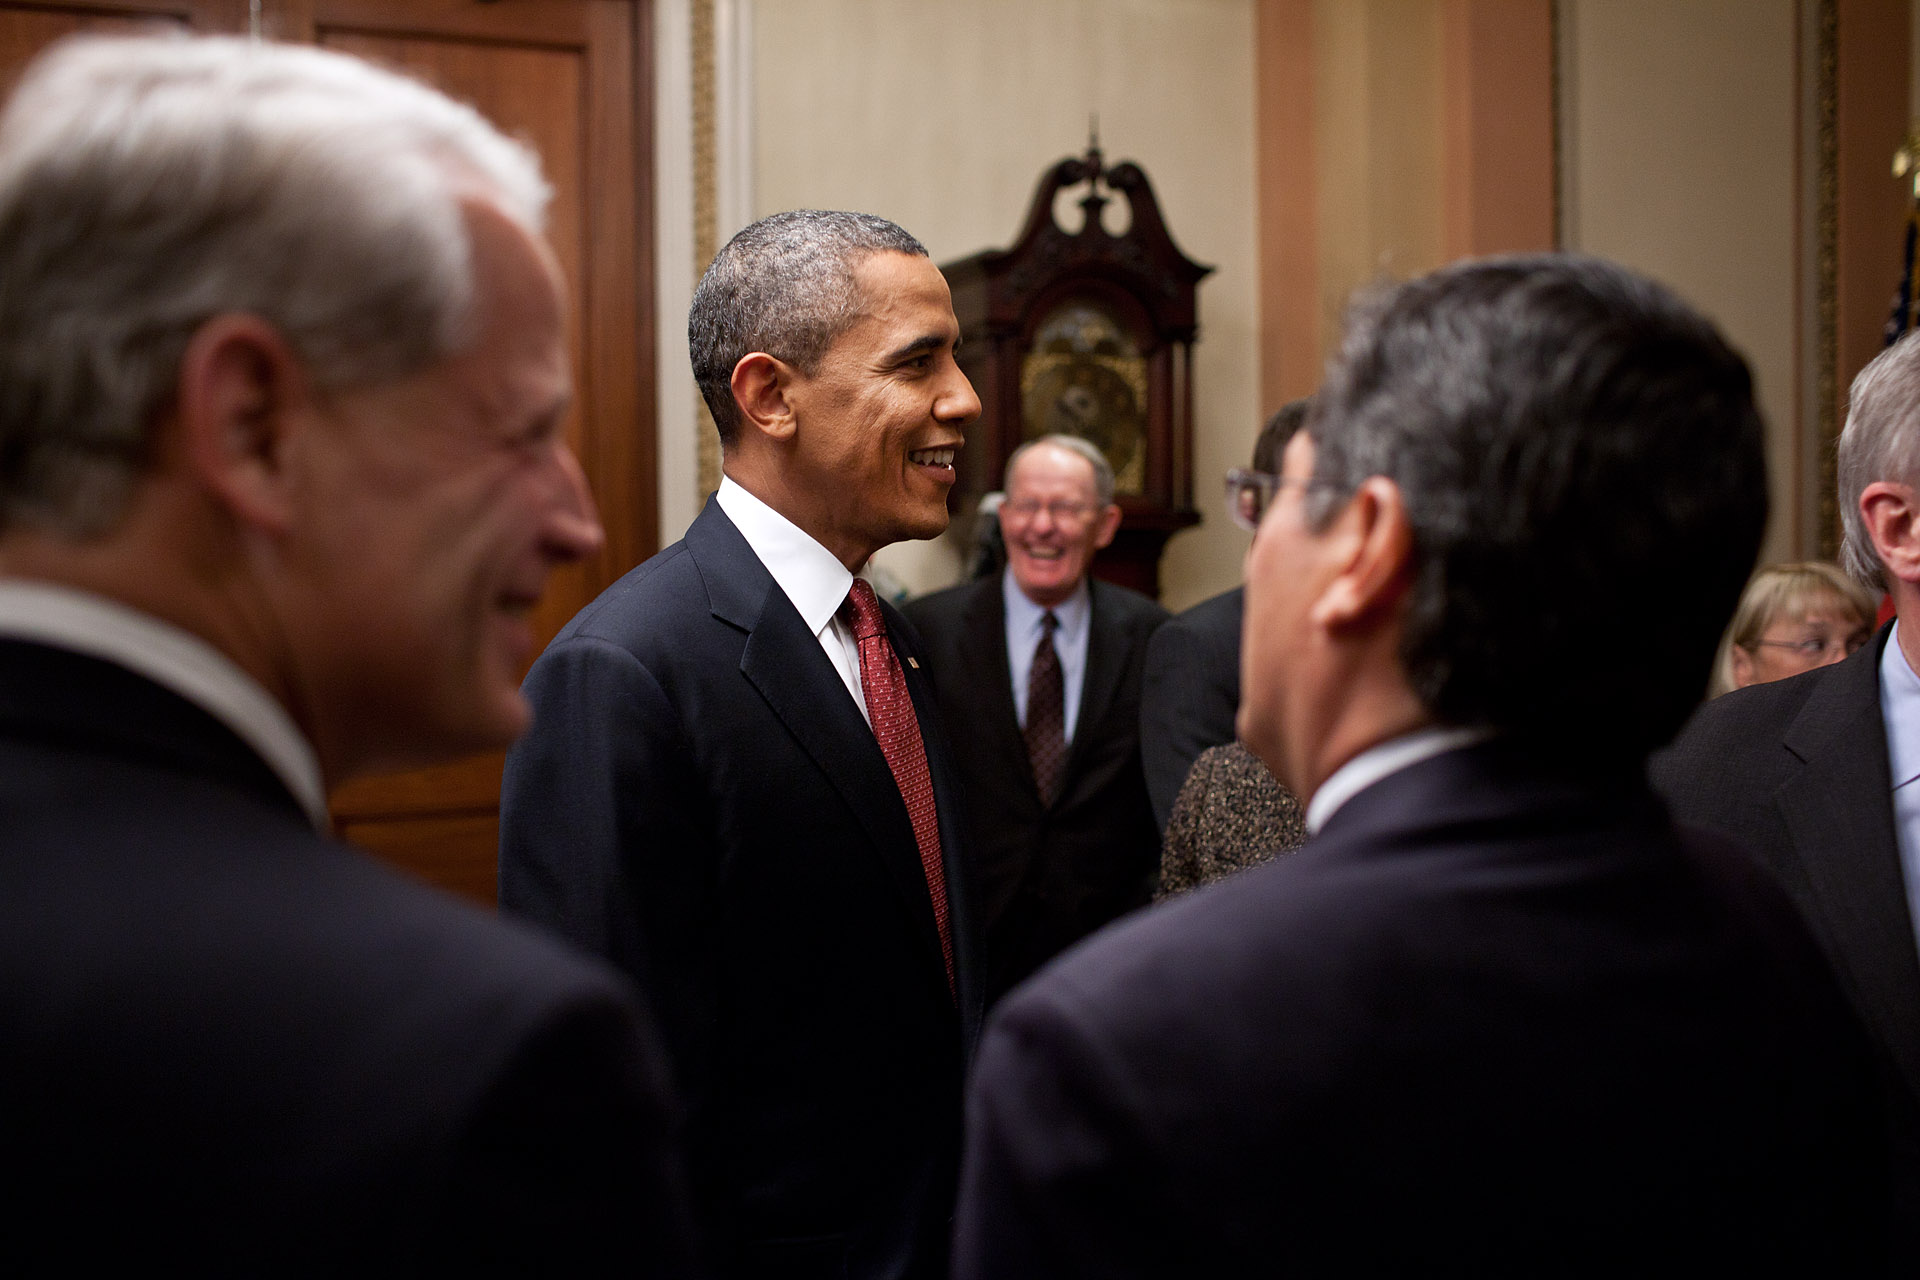 In Pictures: State of the Union Address 2012